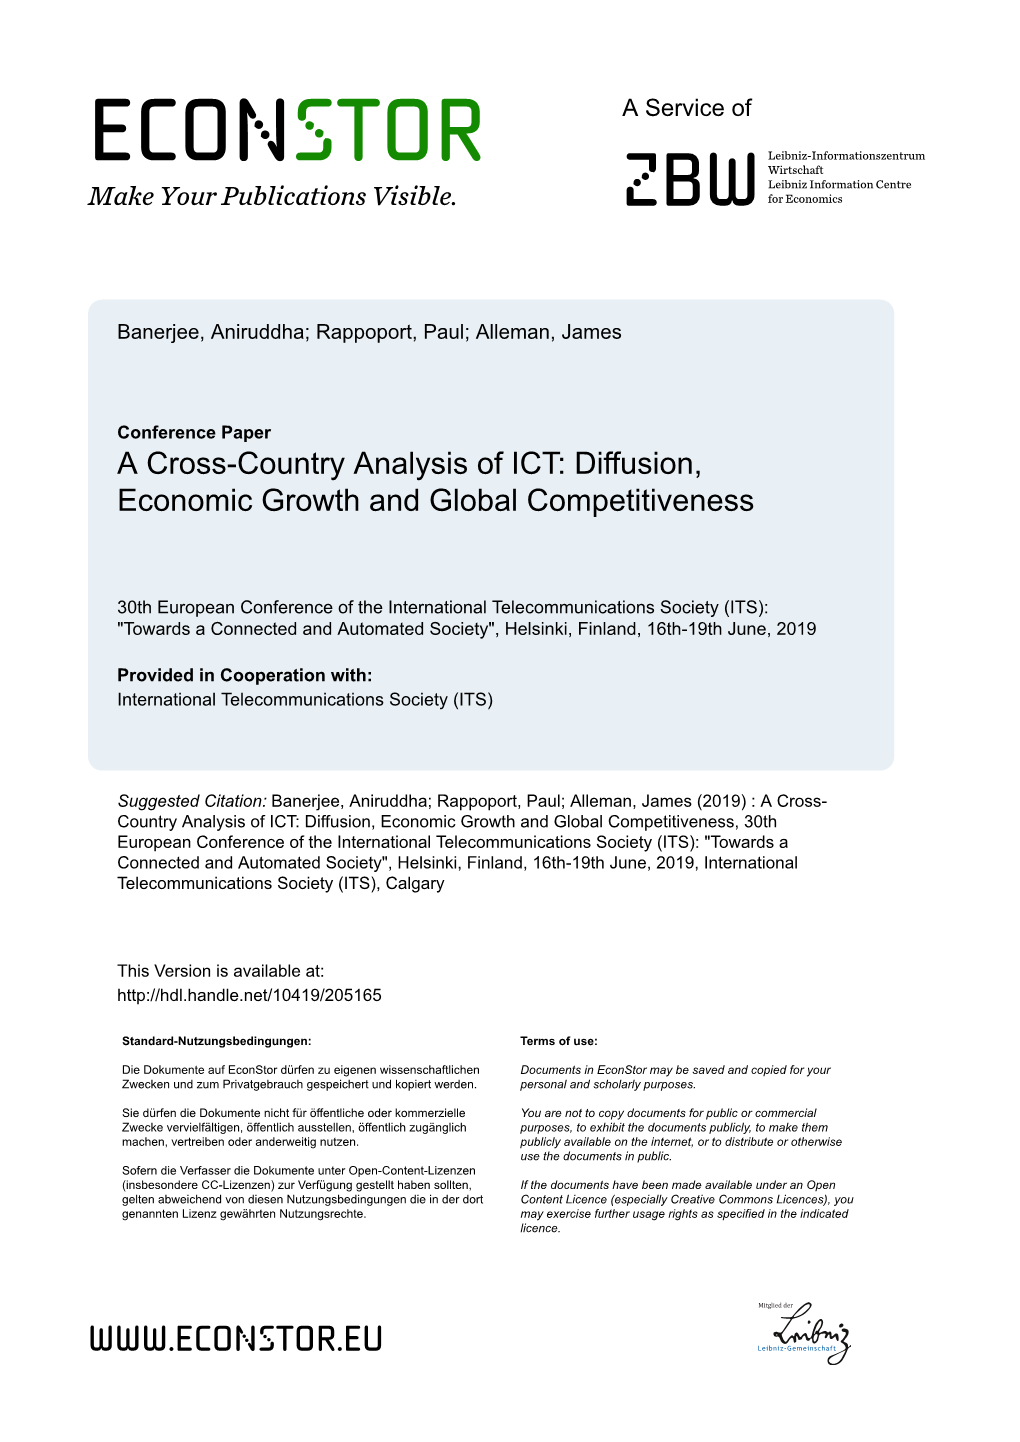 A Cross-Country Analysis of ICT: Diffusion, Economic Growth and Global Competitiveness